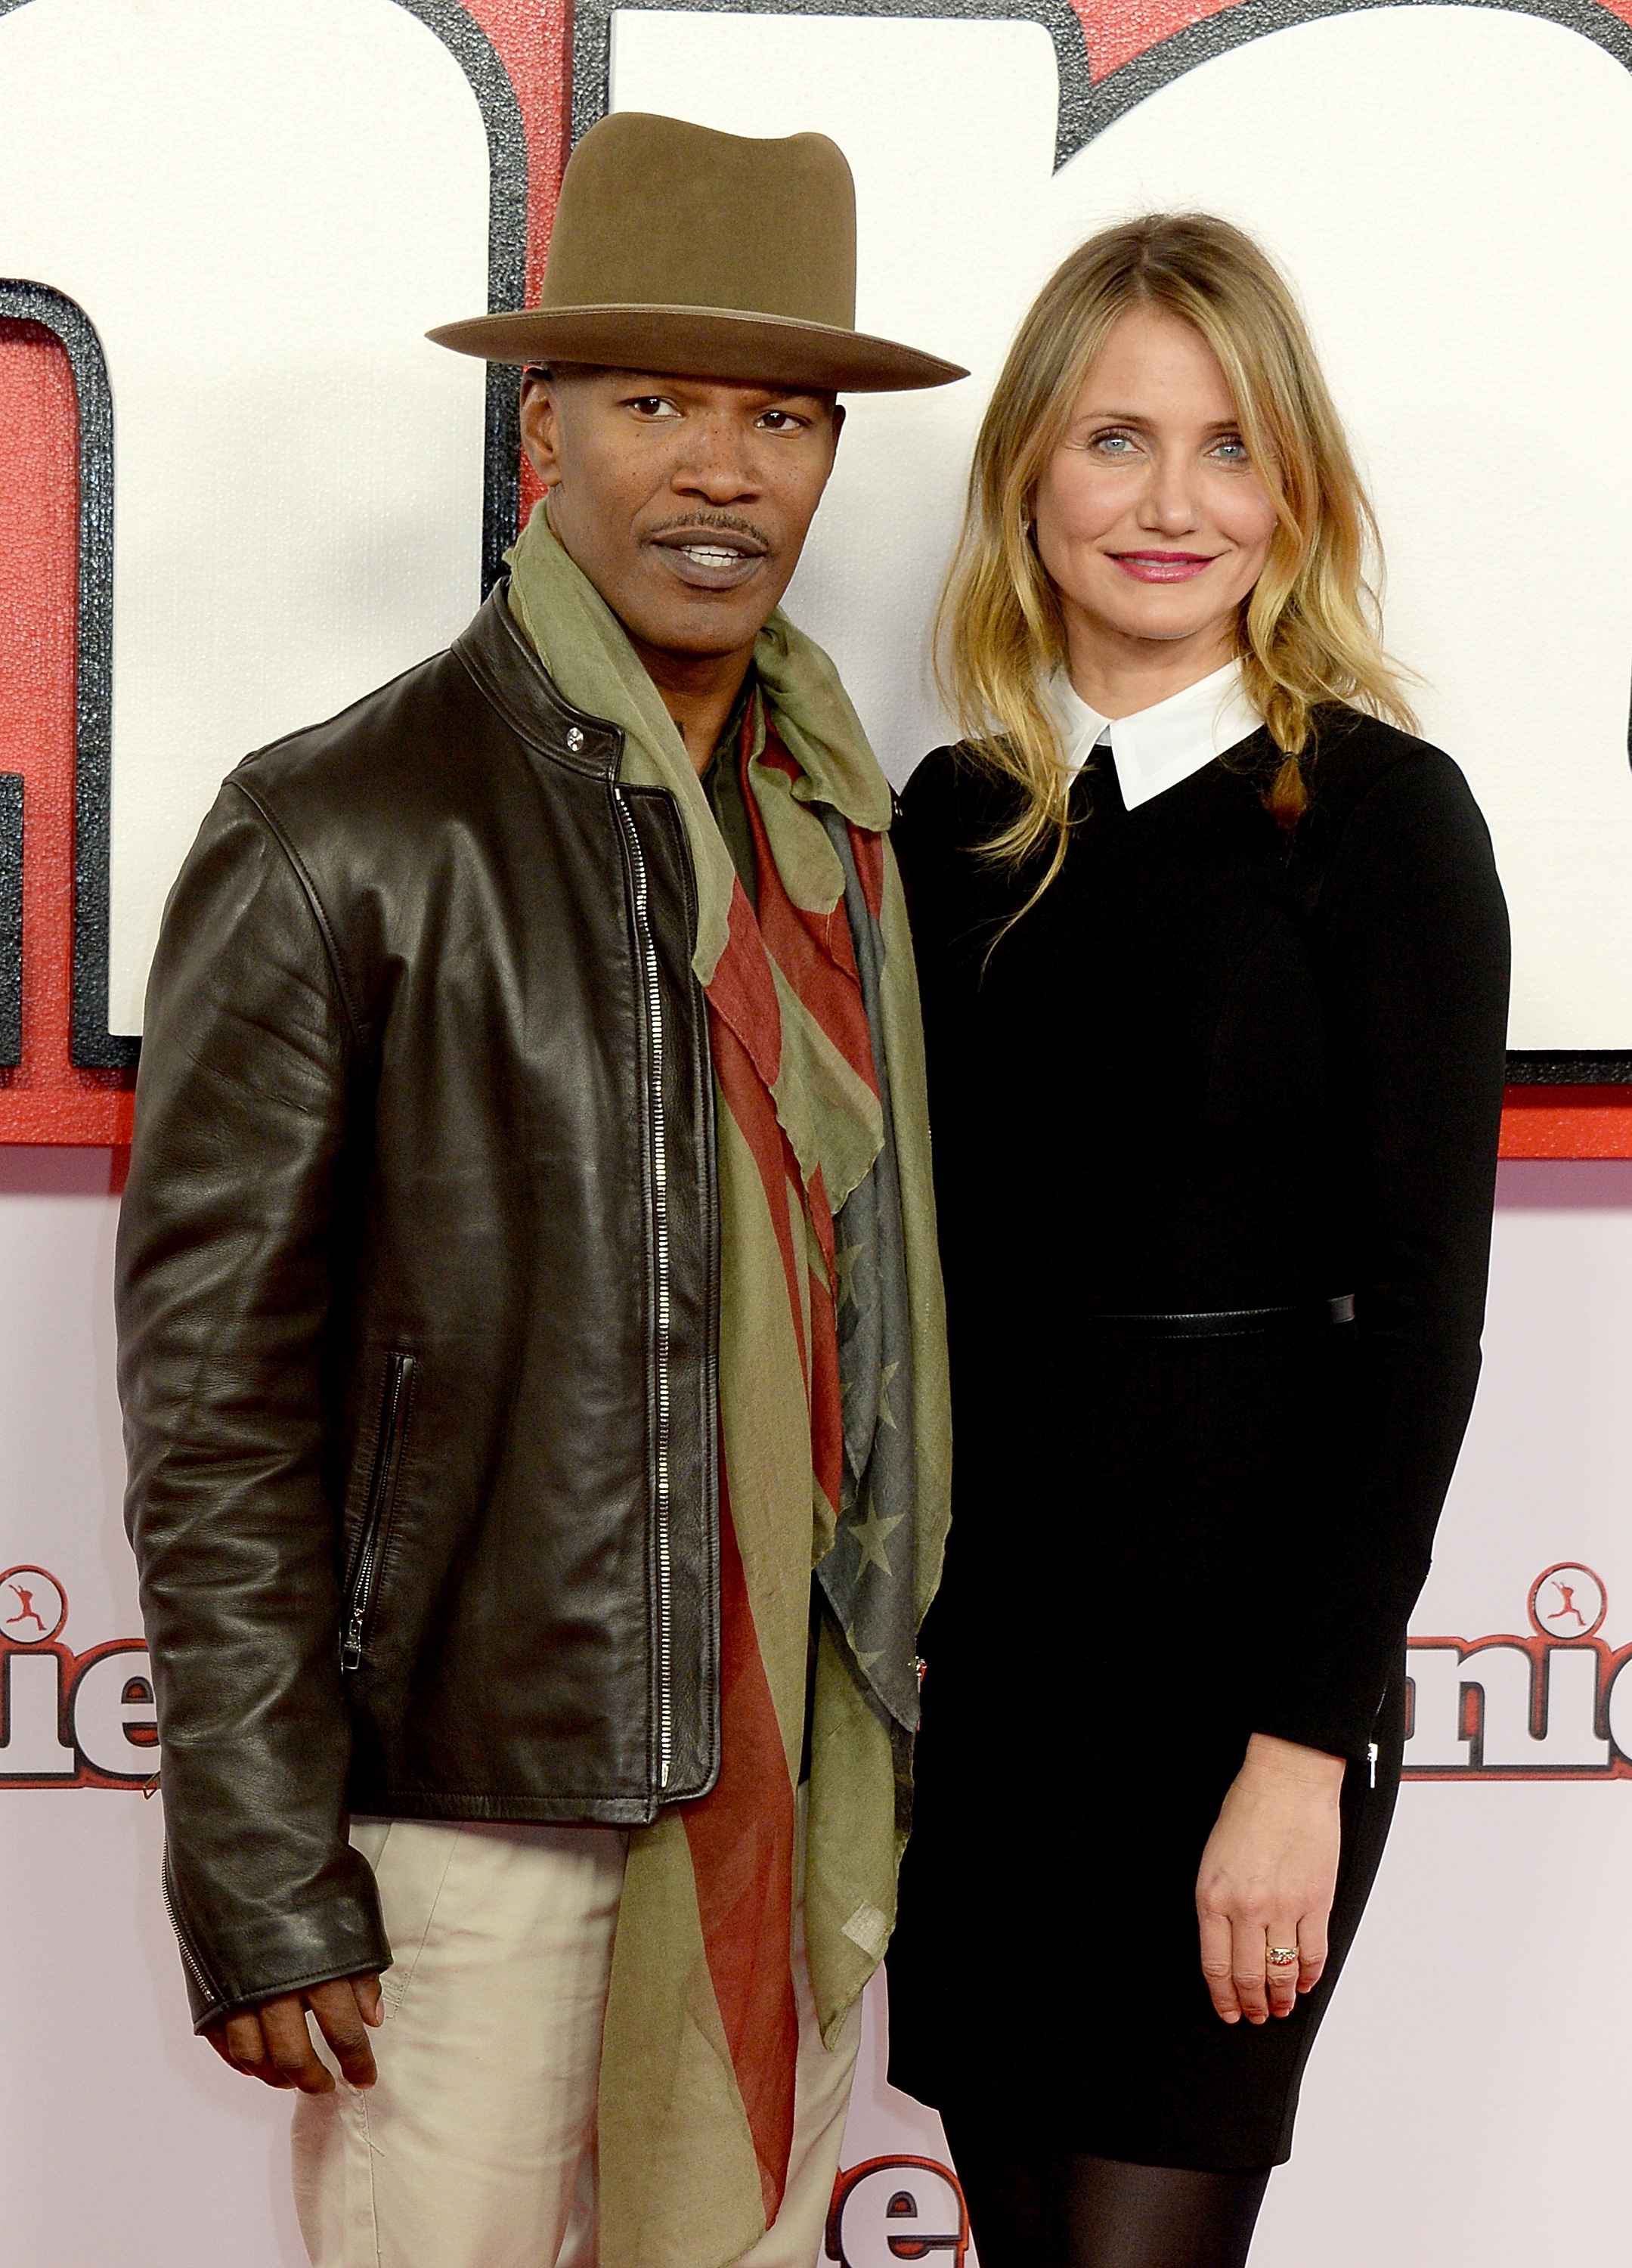 Jamie Foxx and Cameron Diaz in London, England, on December 16, 2014 | Source: Getty Images